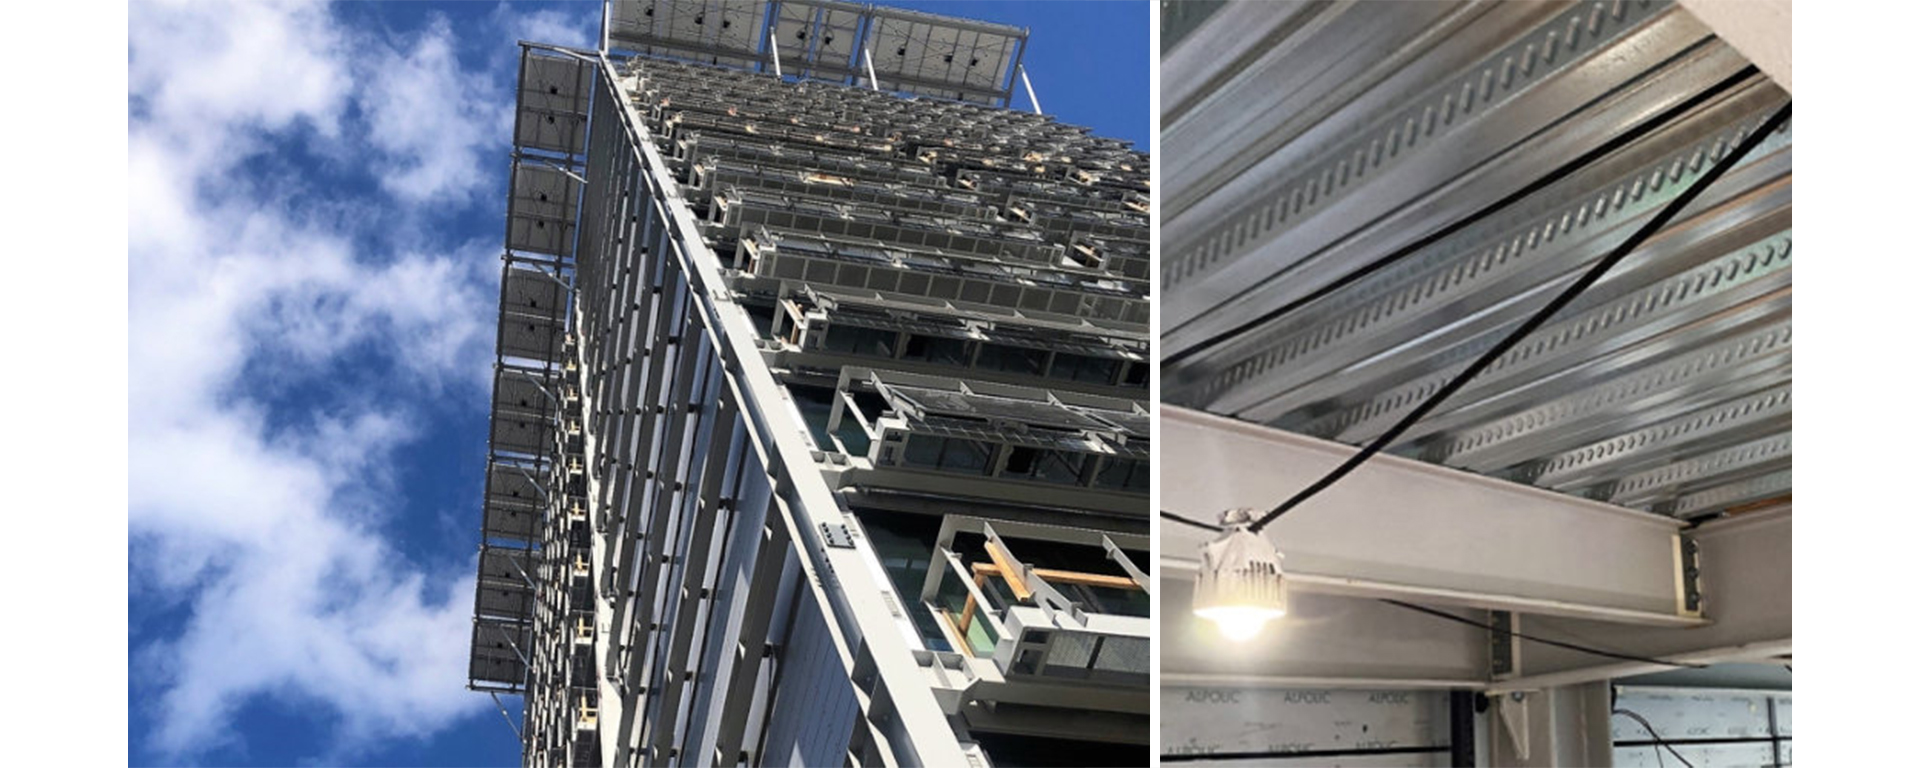 Left image: Angle looking up the side of a high-rise building with exposed structural steel. Right image: Detail shot of structural steel inside the building with hanging light in foreground.